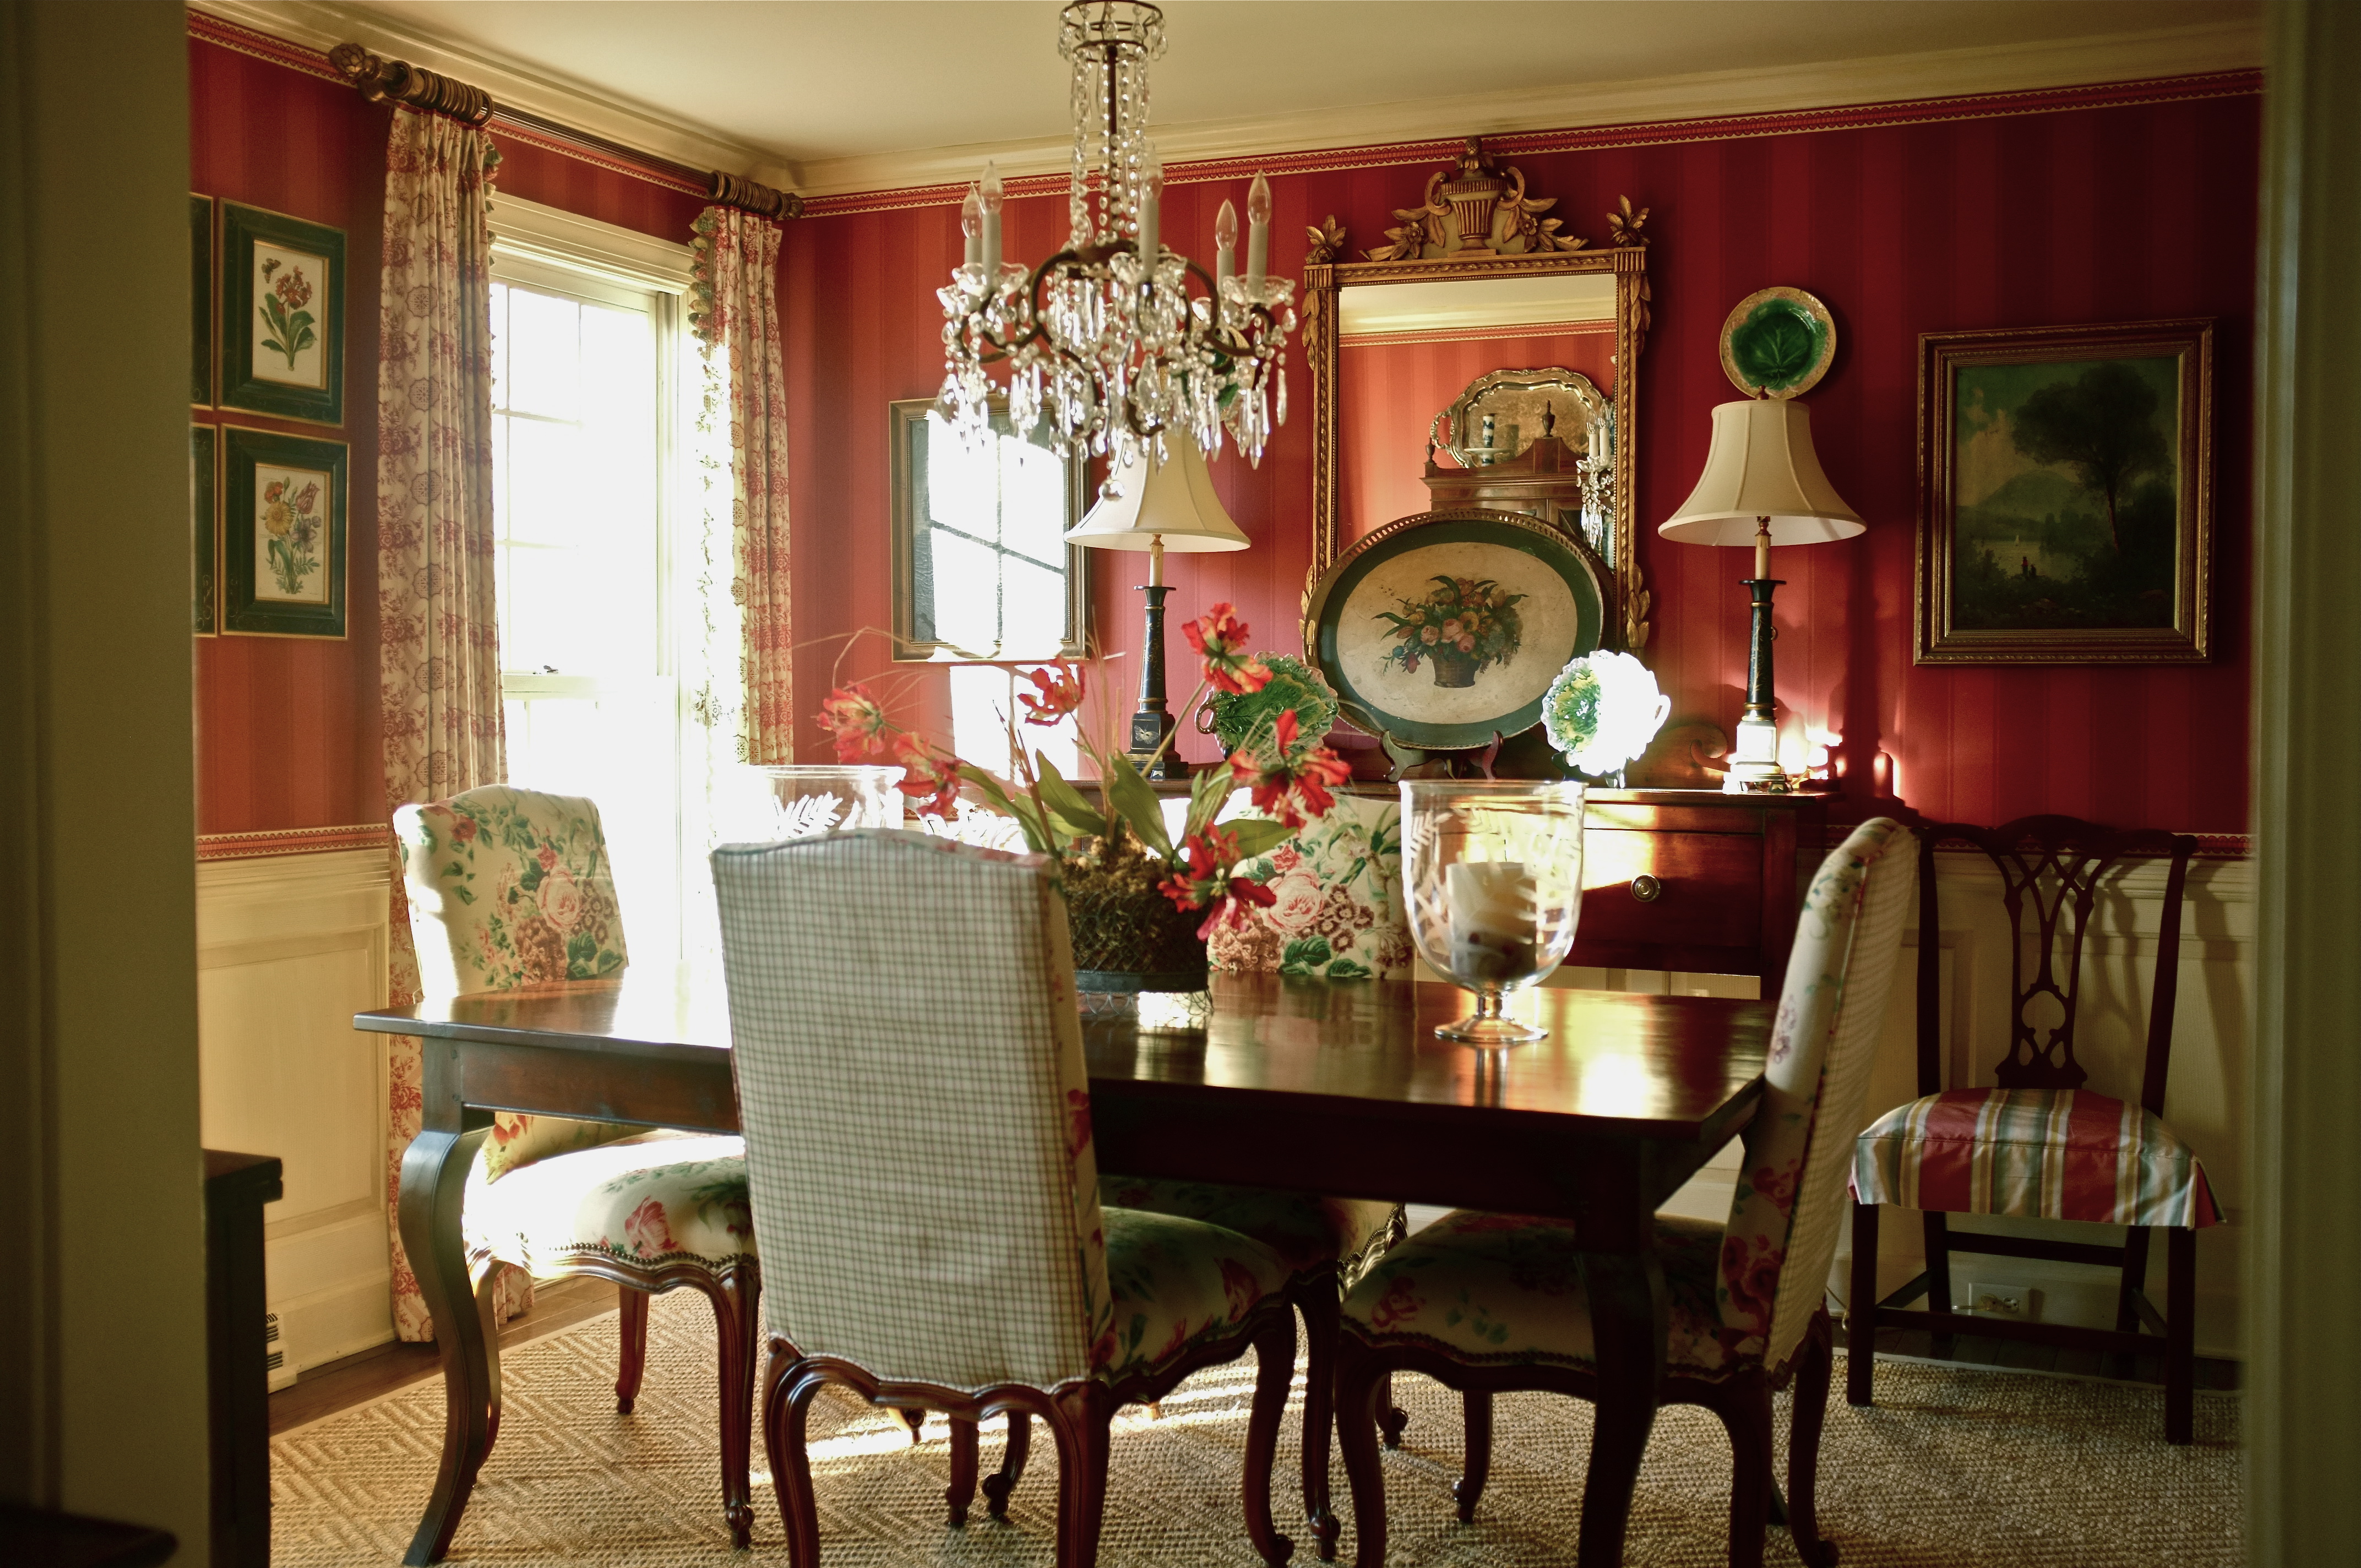 Wallpaper For Dining Room With Wainscoting